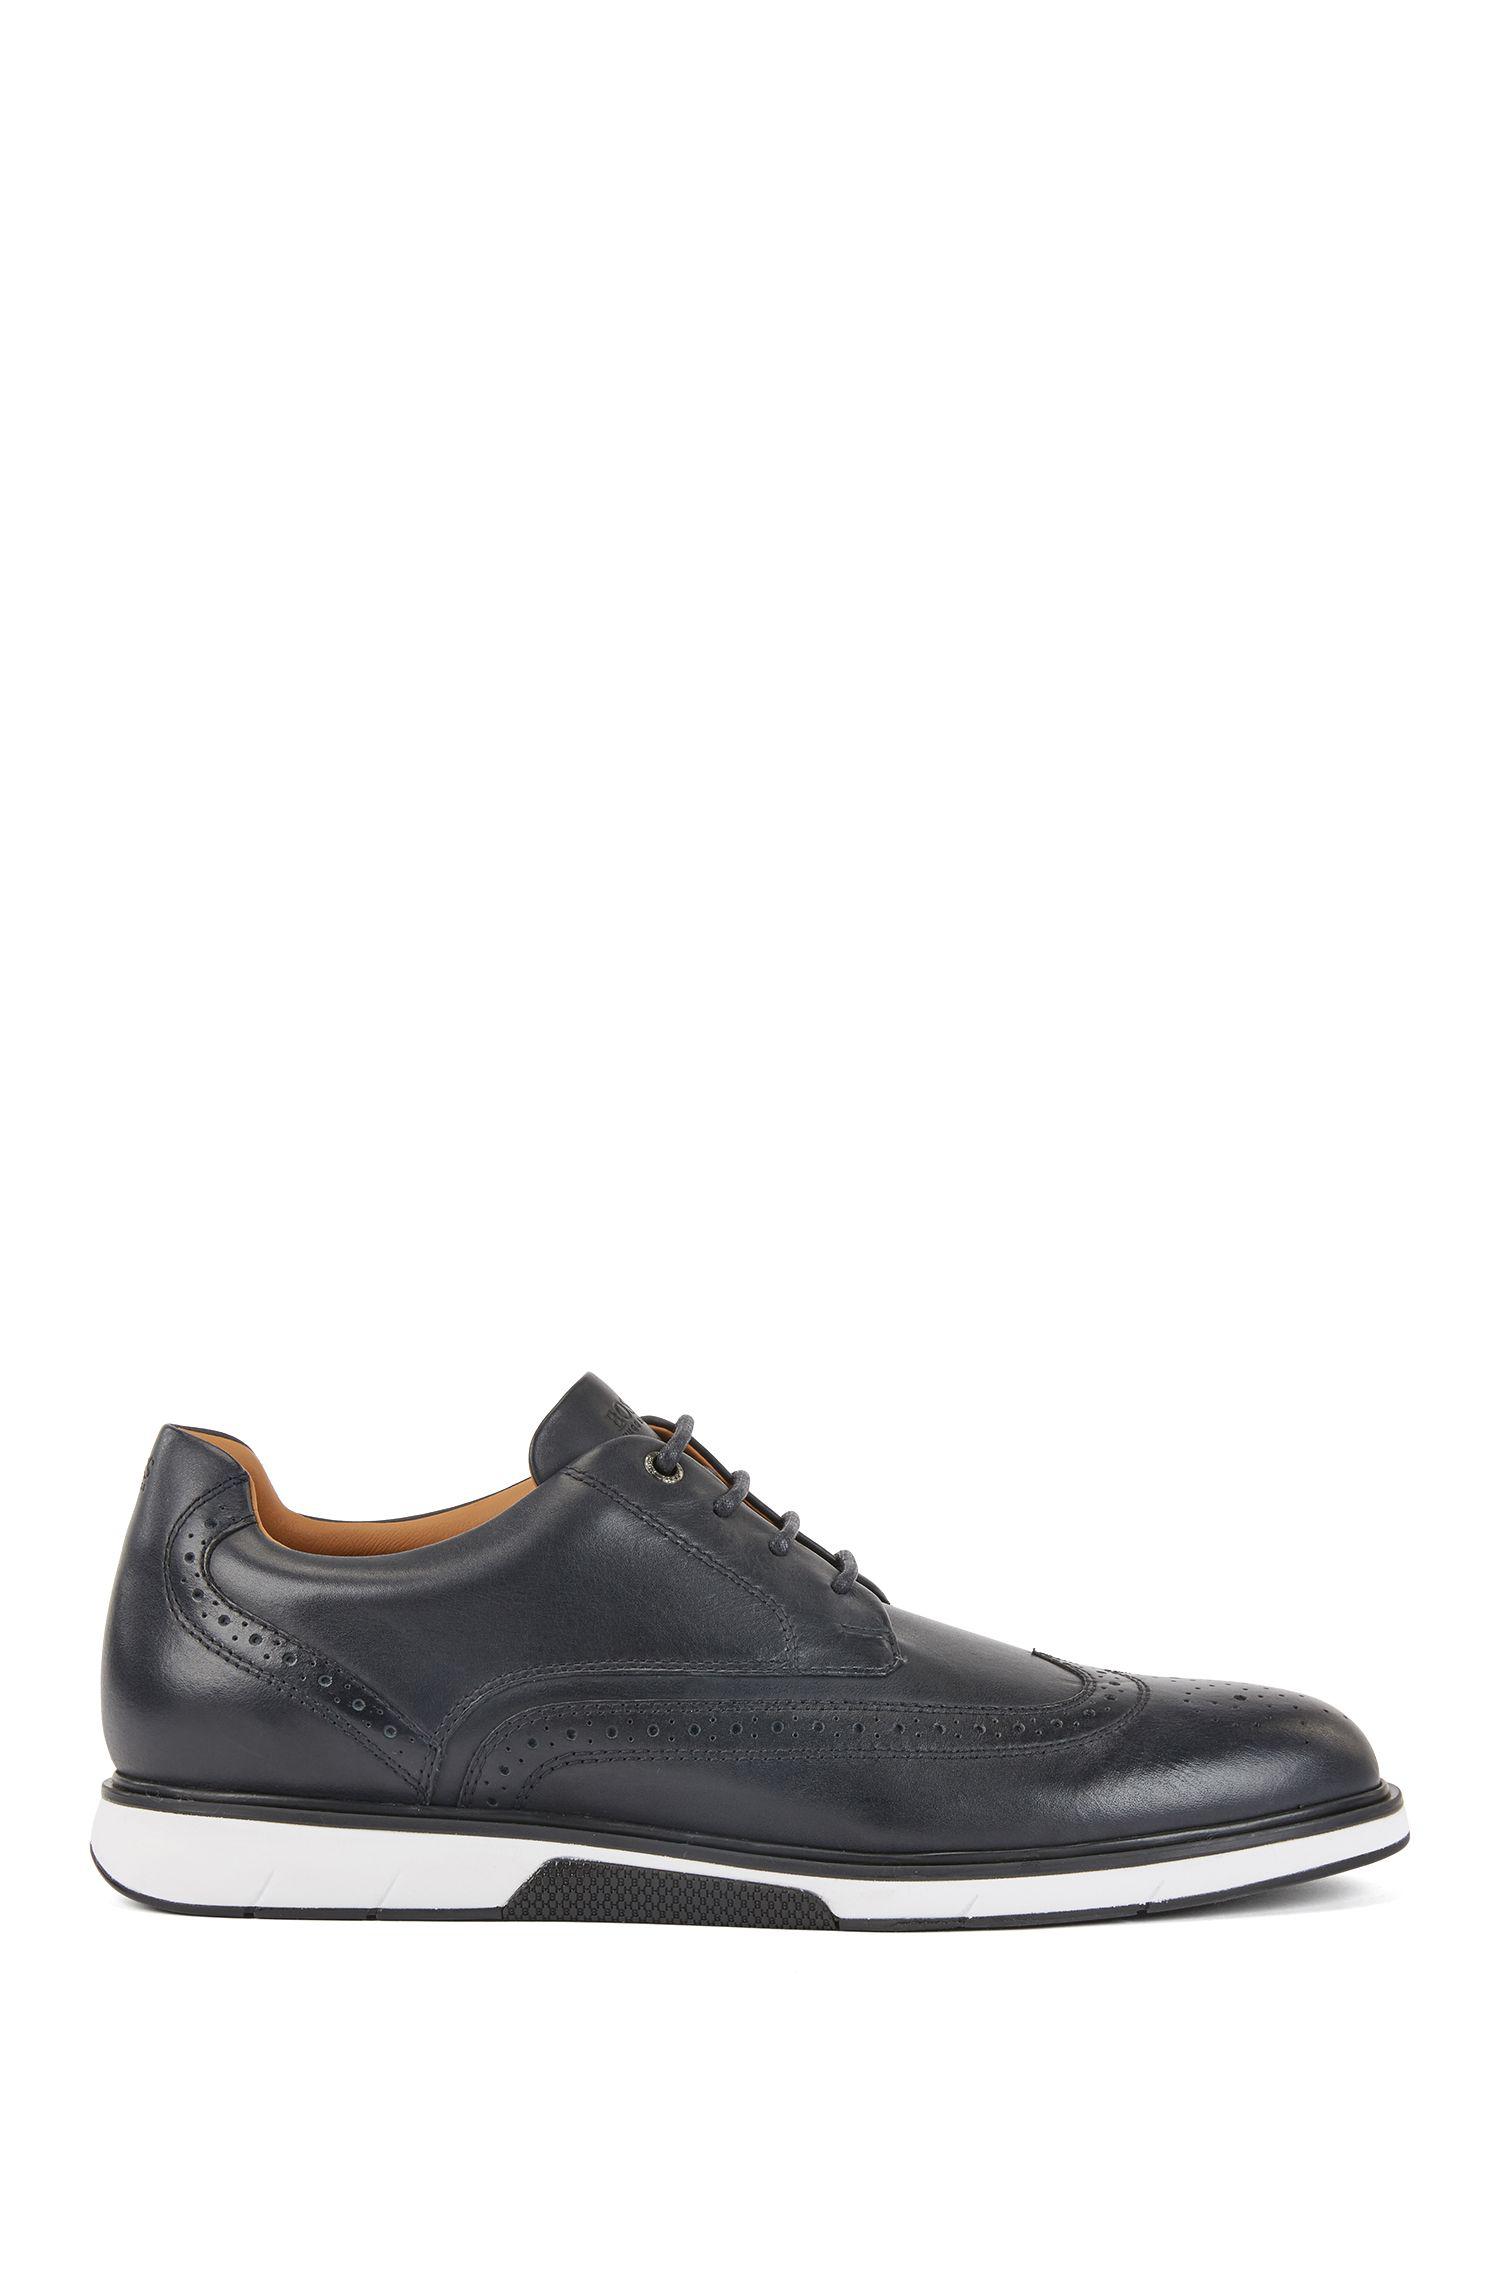 BOSS by Hugo Boss Leather Derby Shoes With Sneaker-style Sole in Dark ...